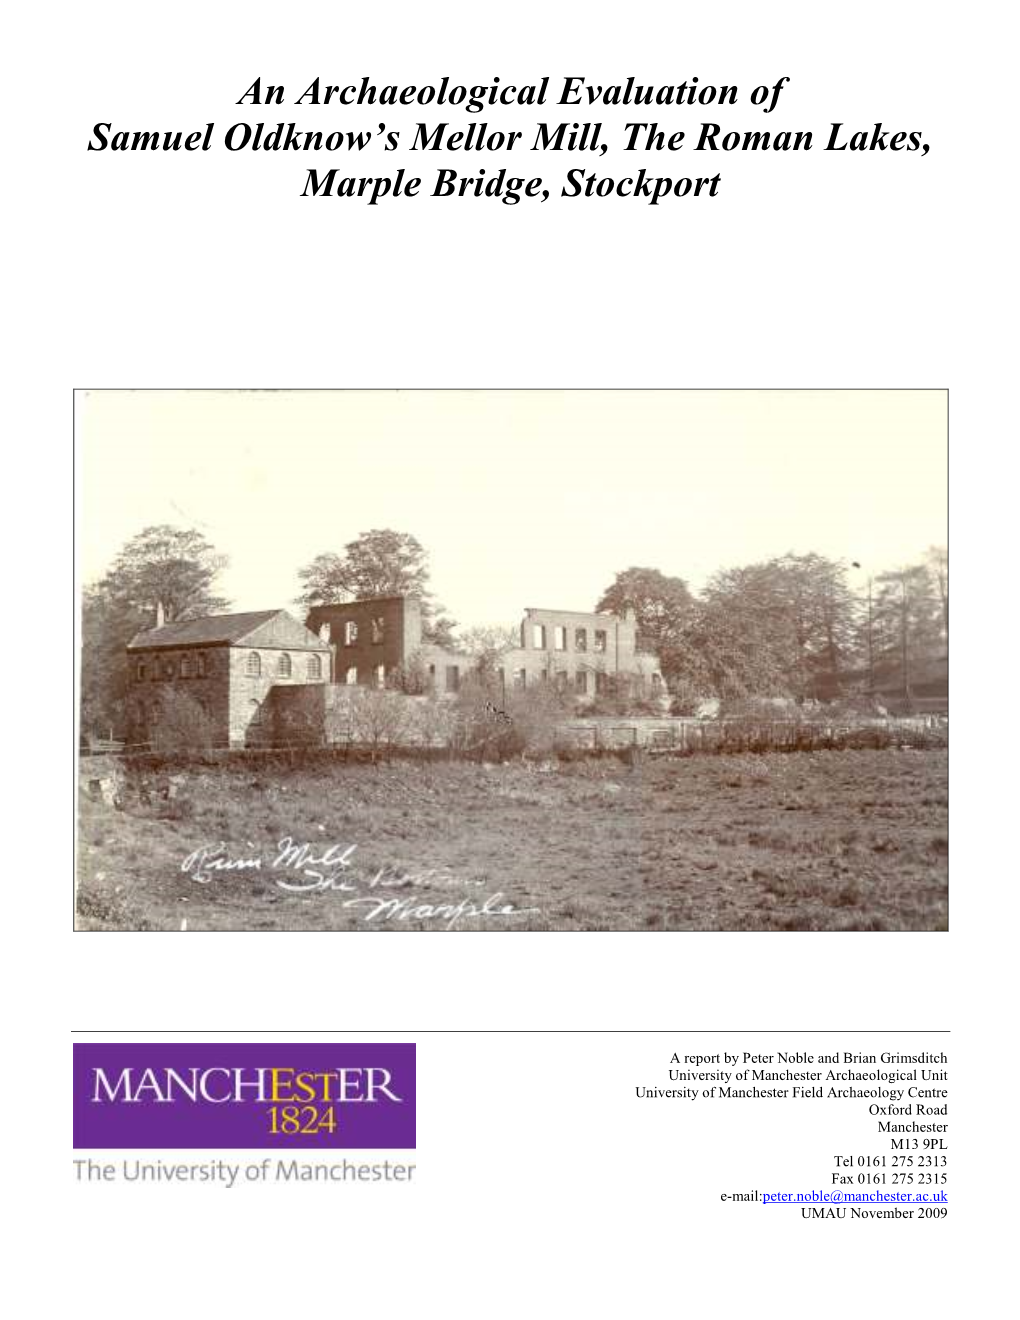 An Archaeological Evaluation of Samuel Oldknow's Mellor Mill, The